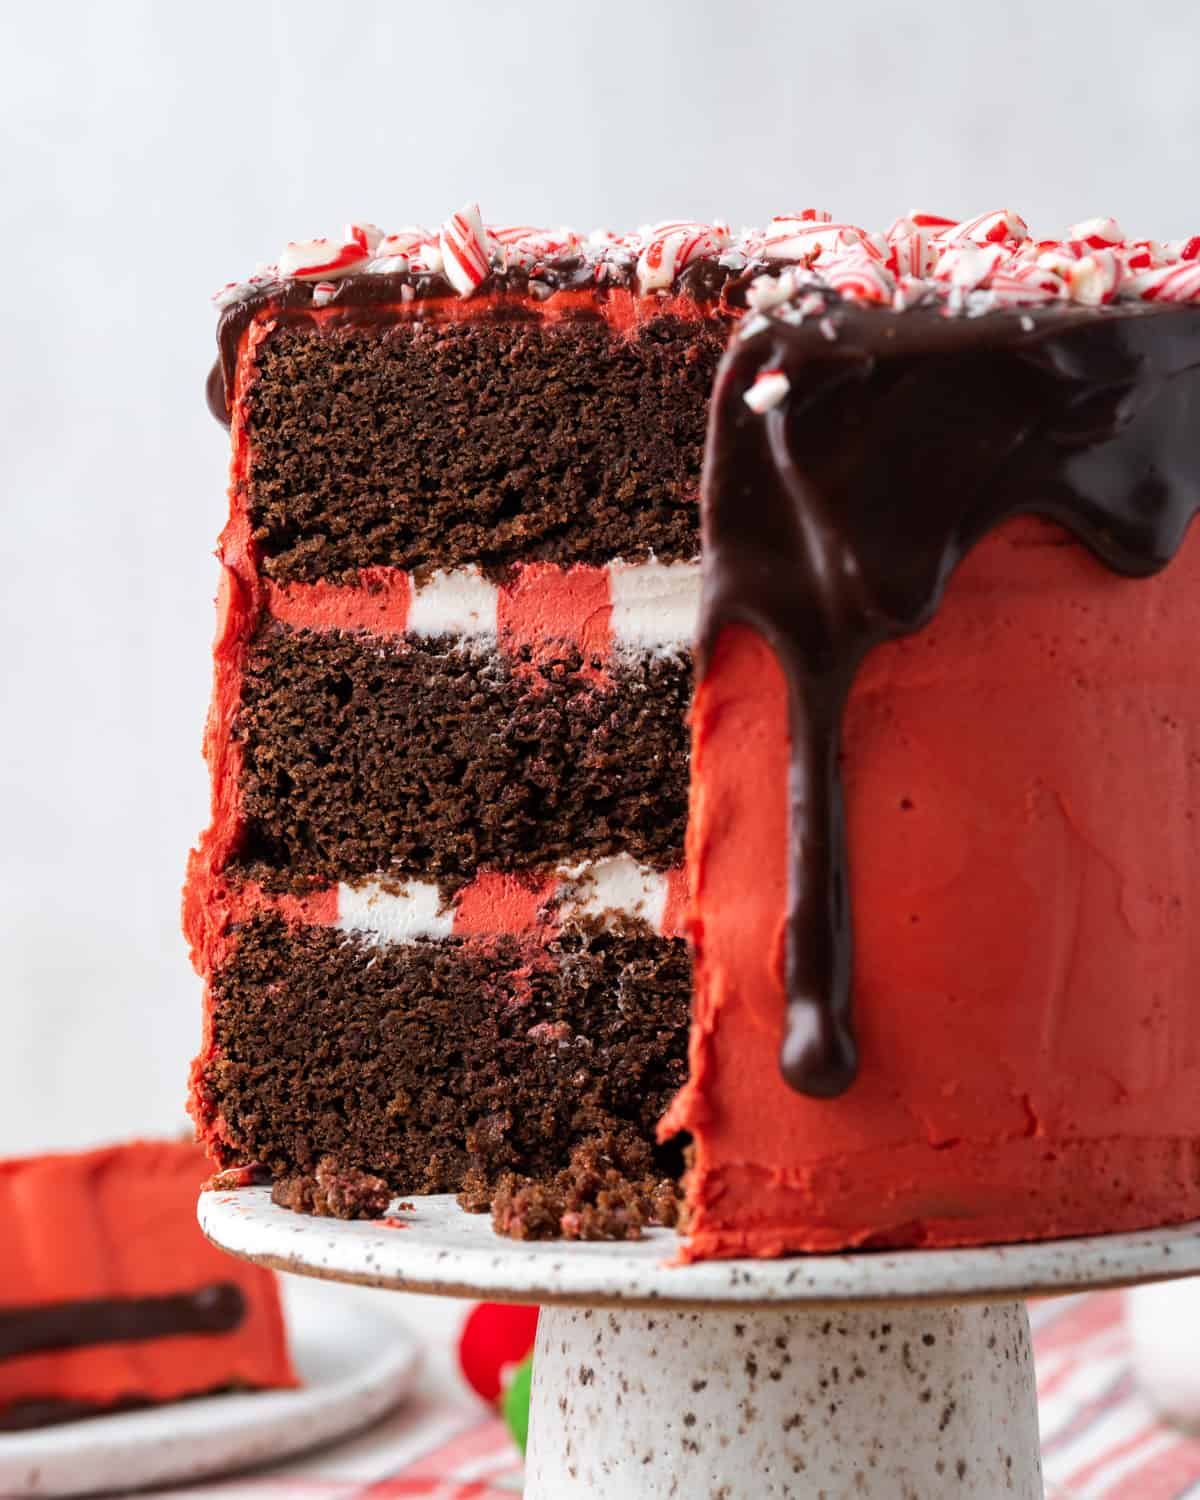 A closeup of the interior of the chocolate peppermint cake showing three chocolate layers with red and white striped buttercream frosting.